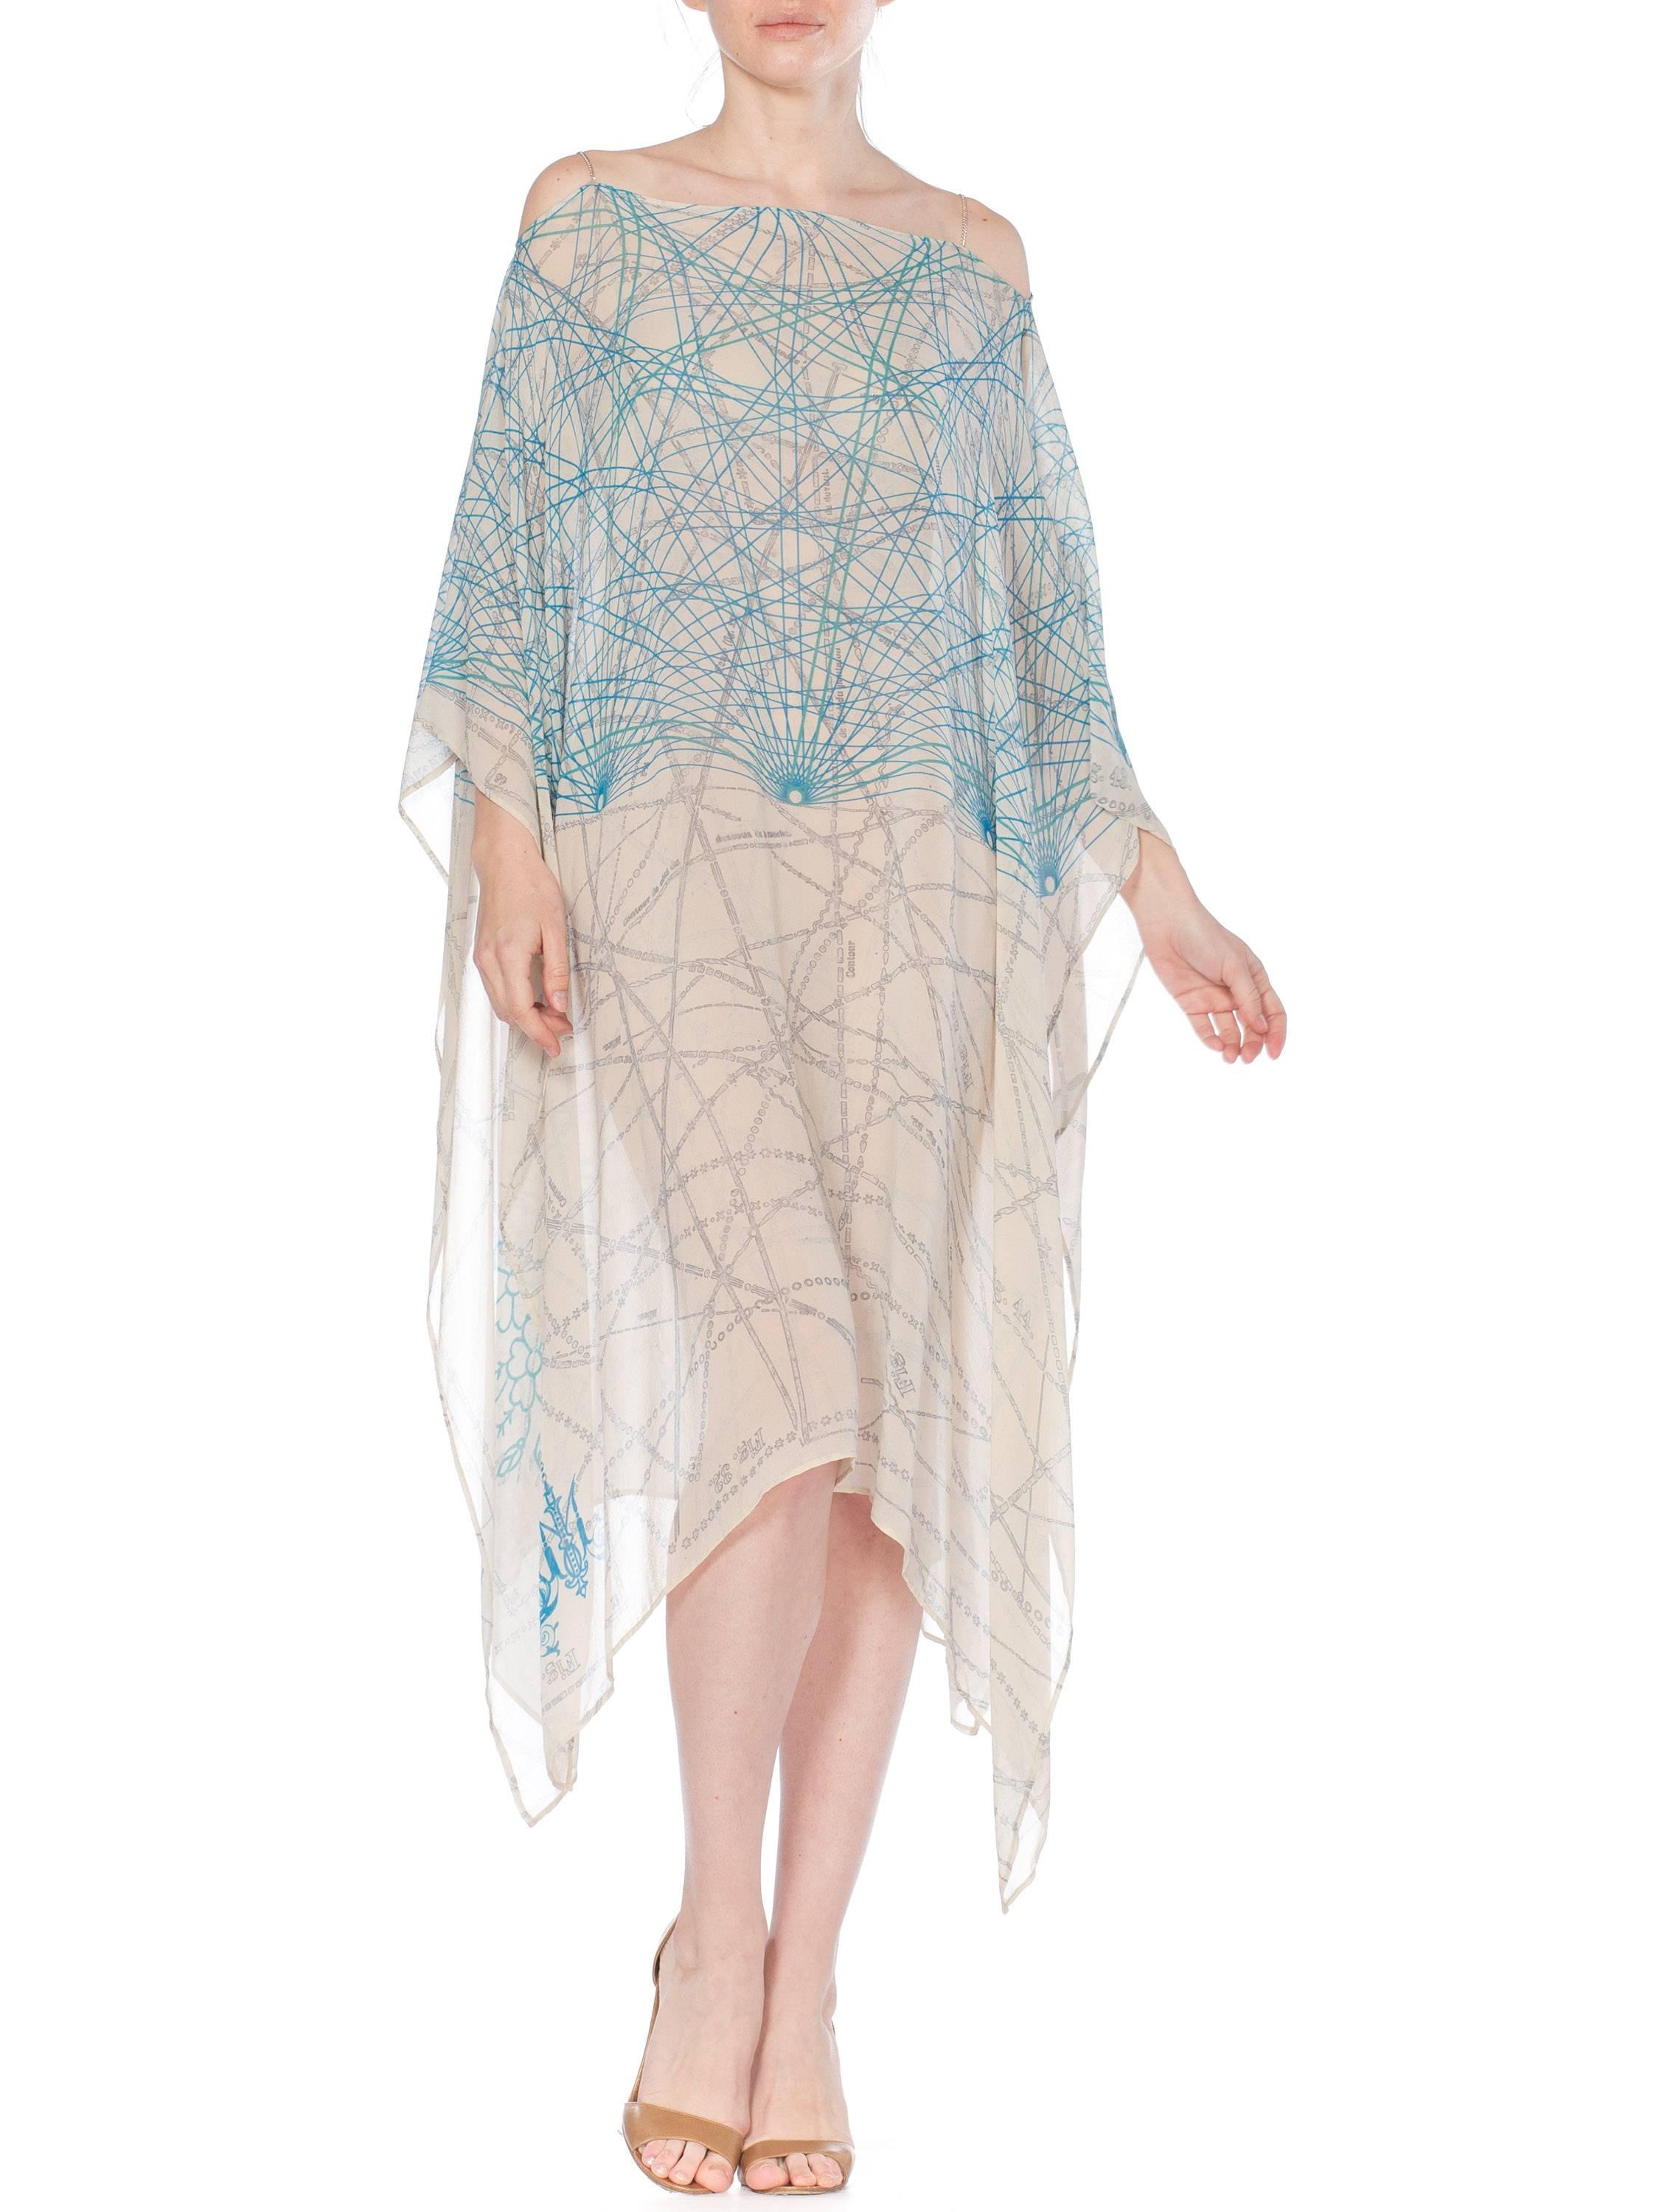 MORPHEW COLLECTION Baby Blue Geometric Silk Chiffon Kaftan With Scarf Belt
MORPHEW COLLECTION is made entirely by hand in our NYC Ateliér of rare antique materials sourced from around the globe. Our sustainable vintage materials represent over a